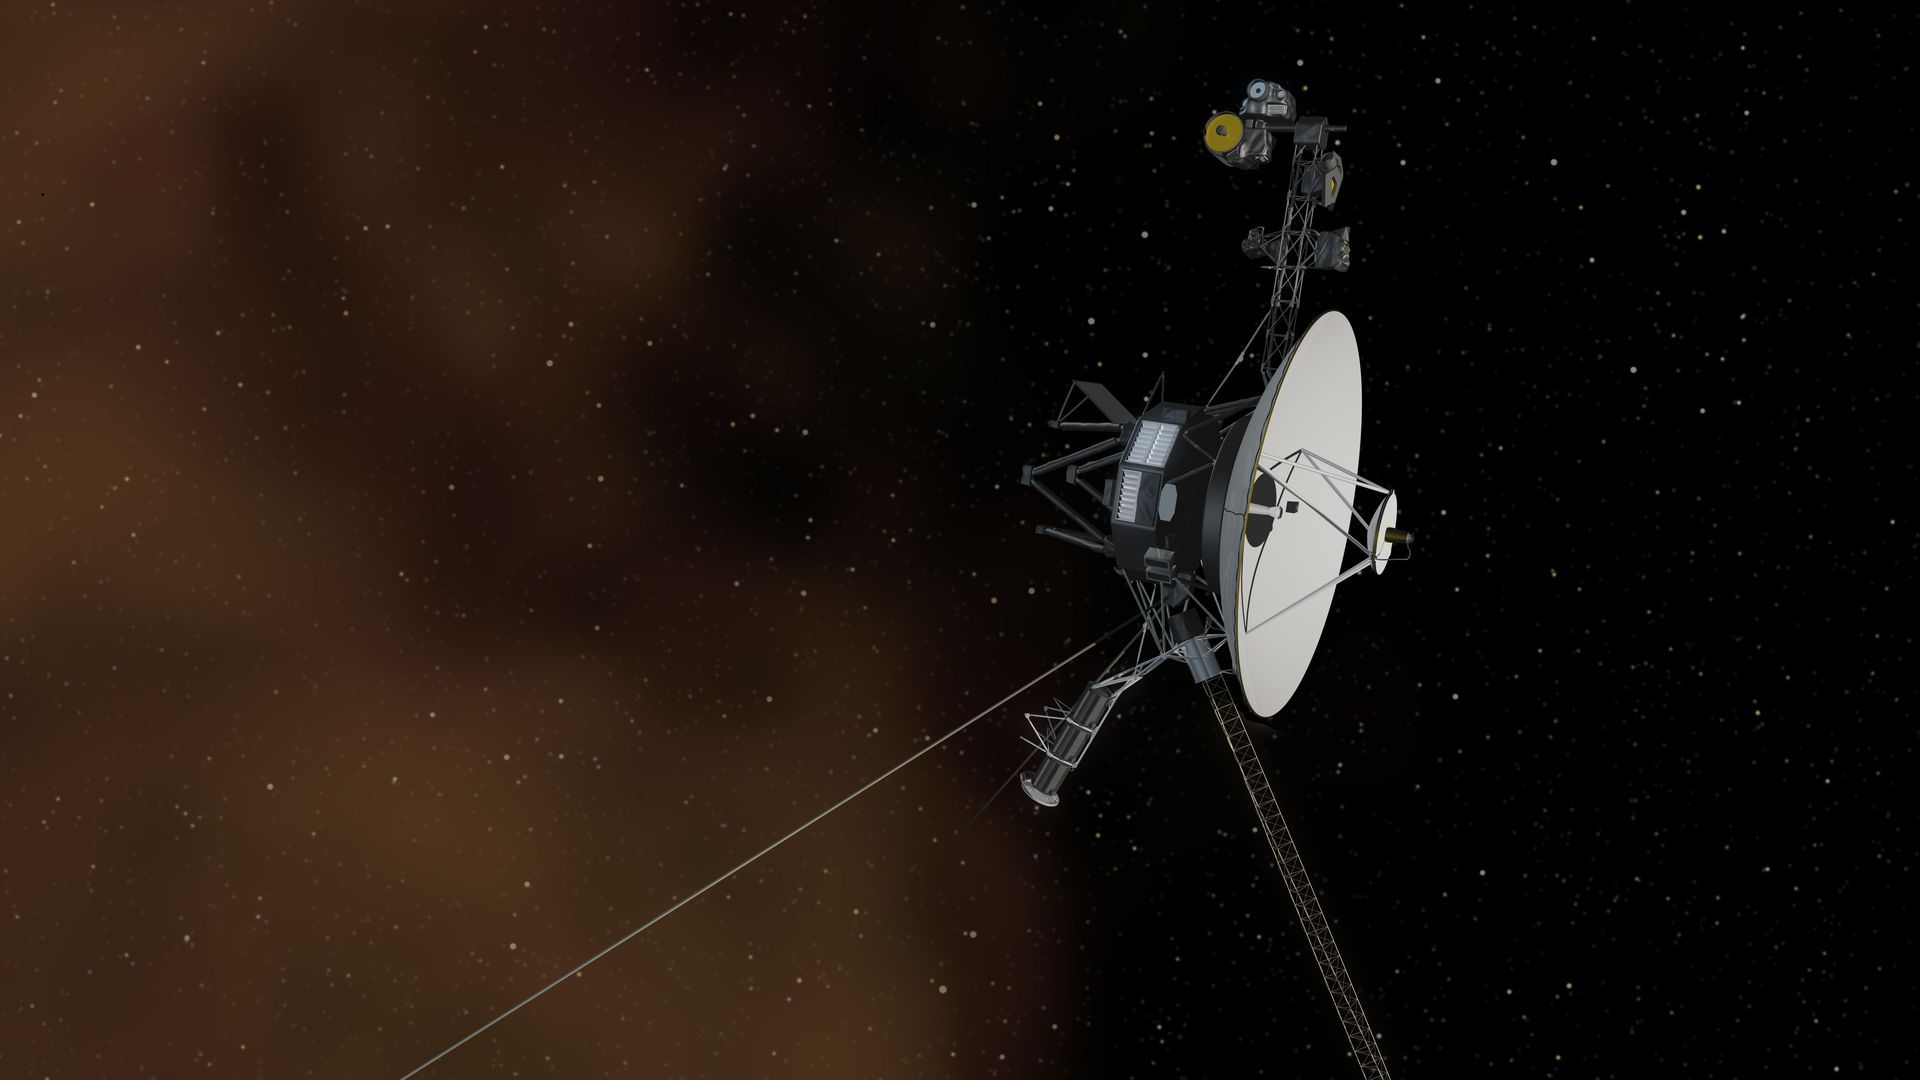 Artist's illustration of Voyager 2 in space